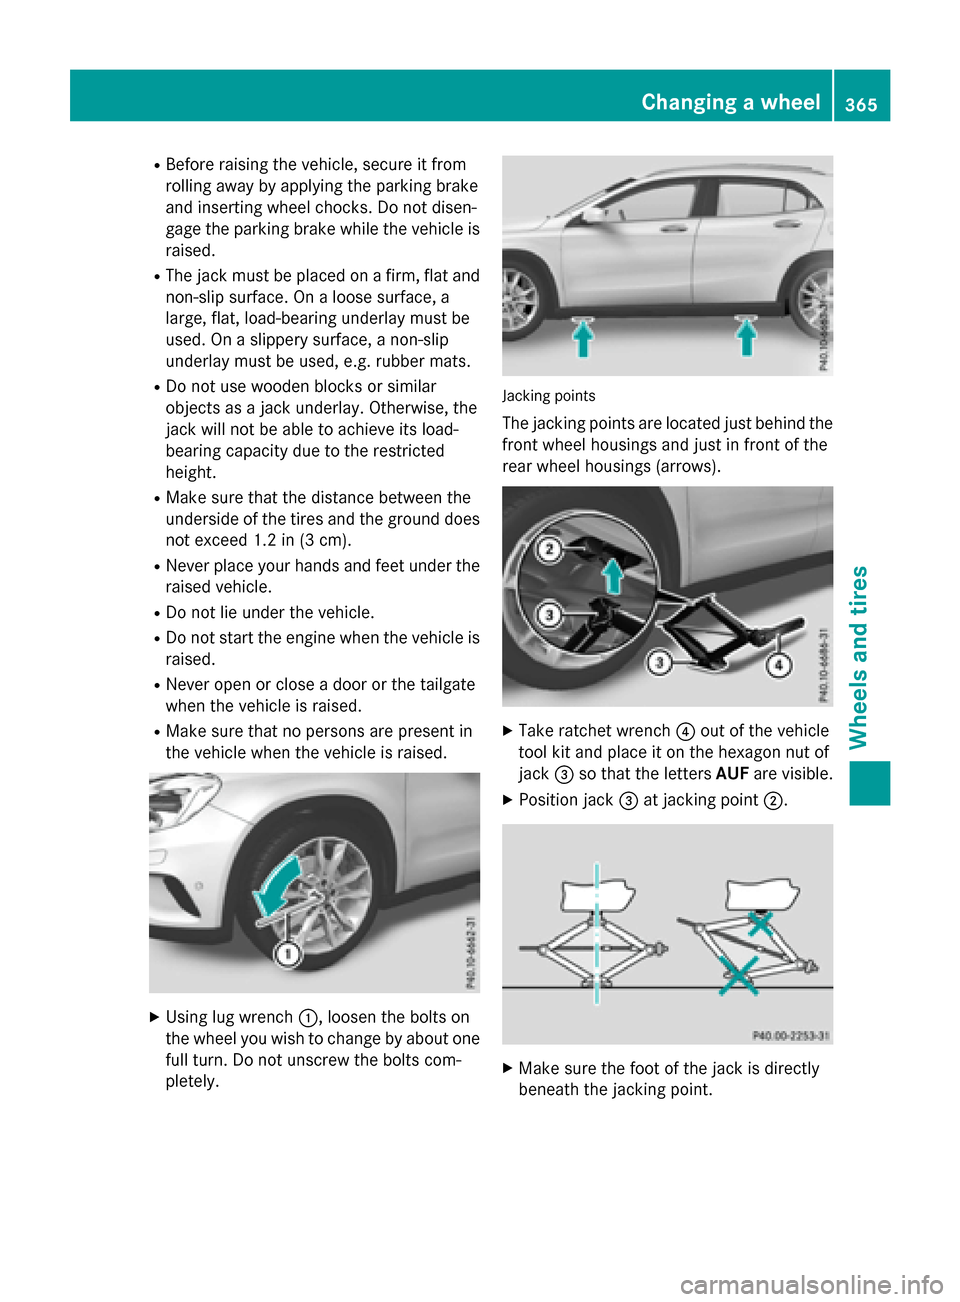 MERCEDES-BENZ GLA-Class 2016 X156 Manual Online RBefore raising the vehicle, secure it from
rolling away by applying the parking brake
and inserting wheel chocks. Do not disen-
gage the parking brake while the vehicle is
raised.
RThe jack must be p